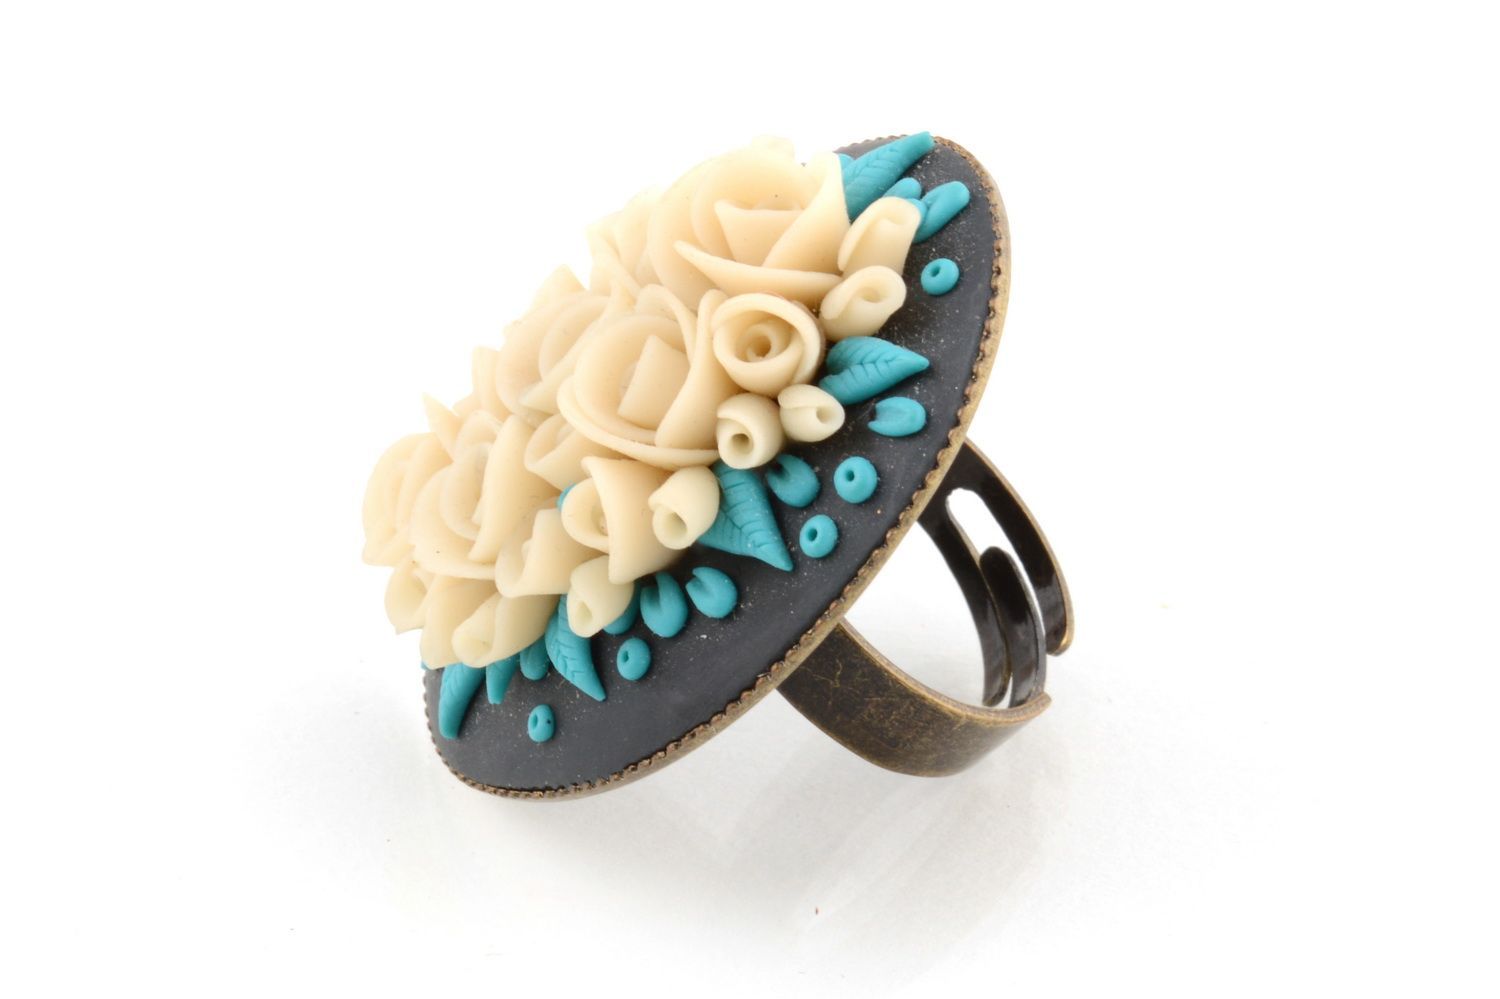 Handmade large designer round polymer clay floral jewelry ring with metal basis photo 3